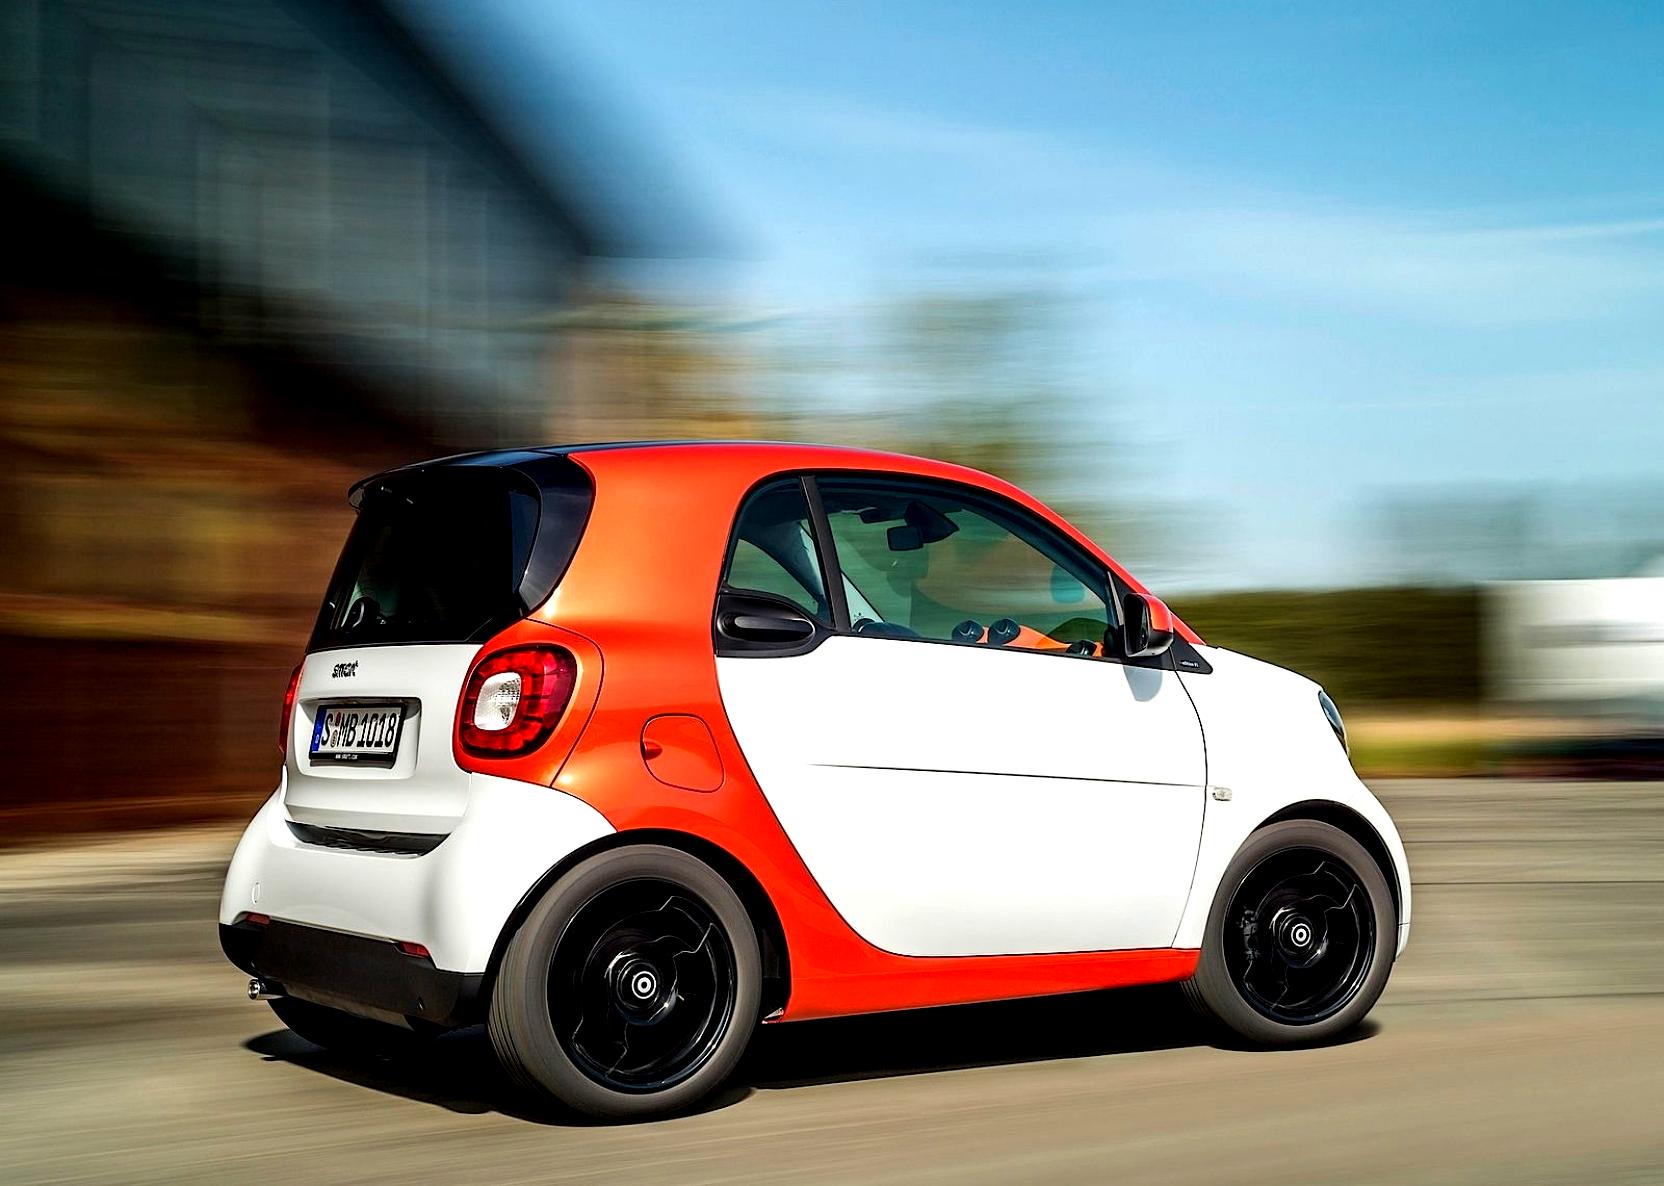 Smart Fortwo 2014 #50